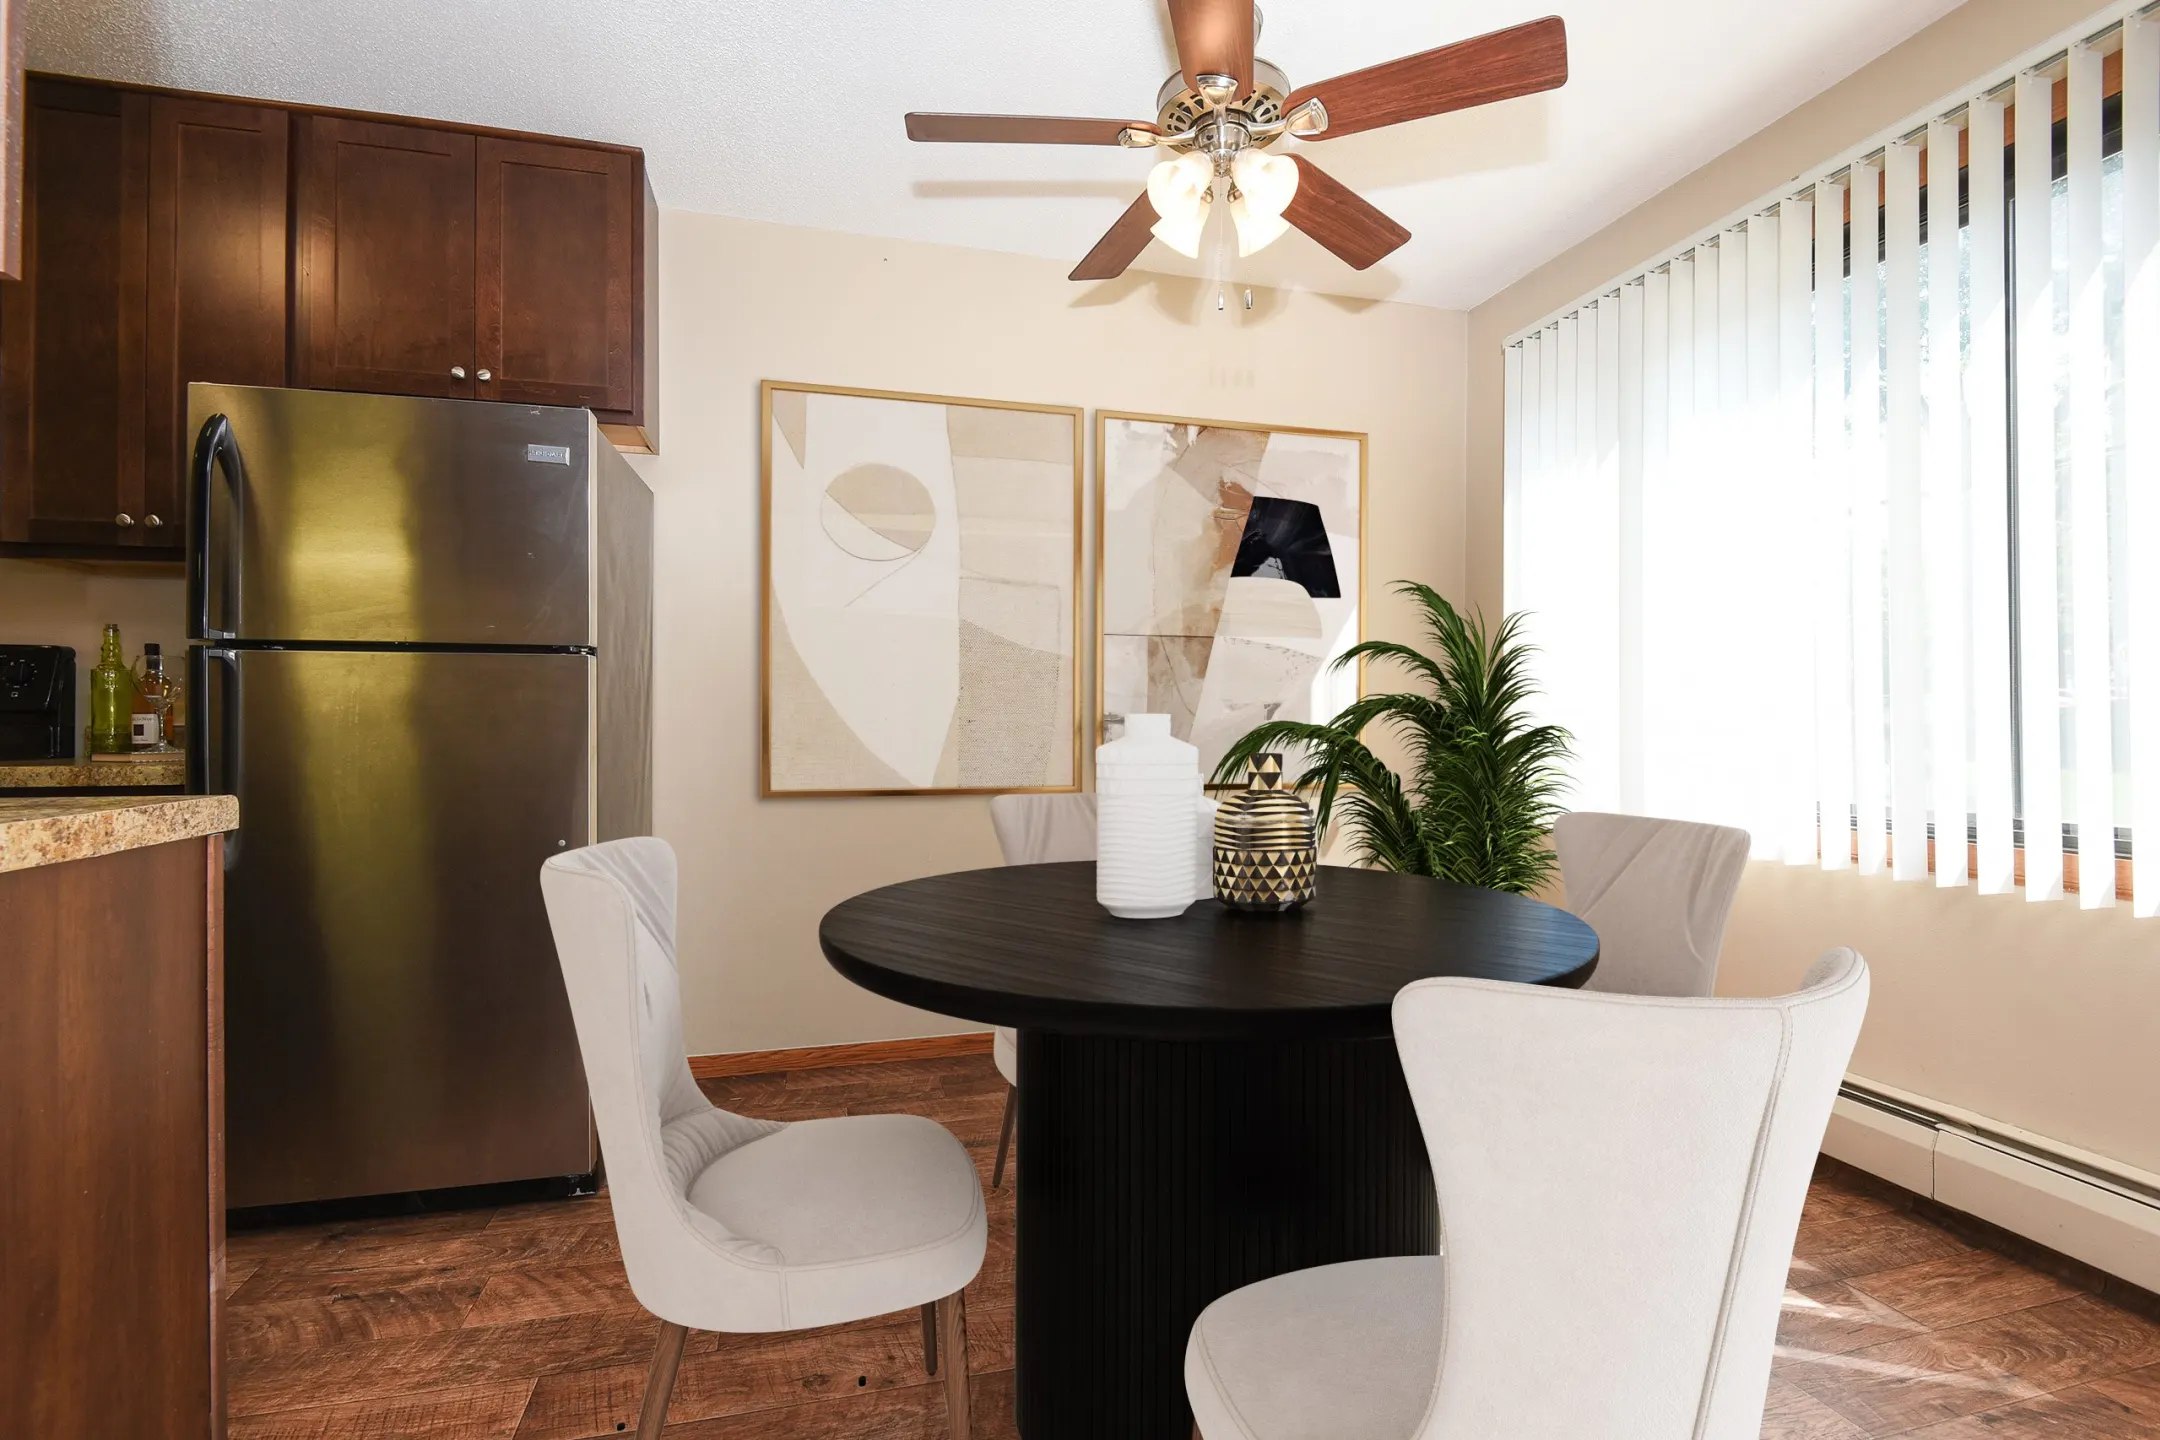 Dining Room - The Edge Of Uptown Apartments - Saint Louis Park, MN